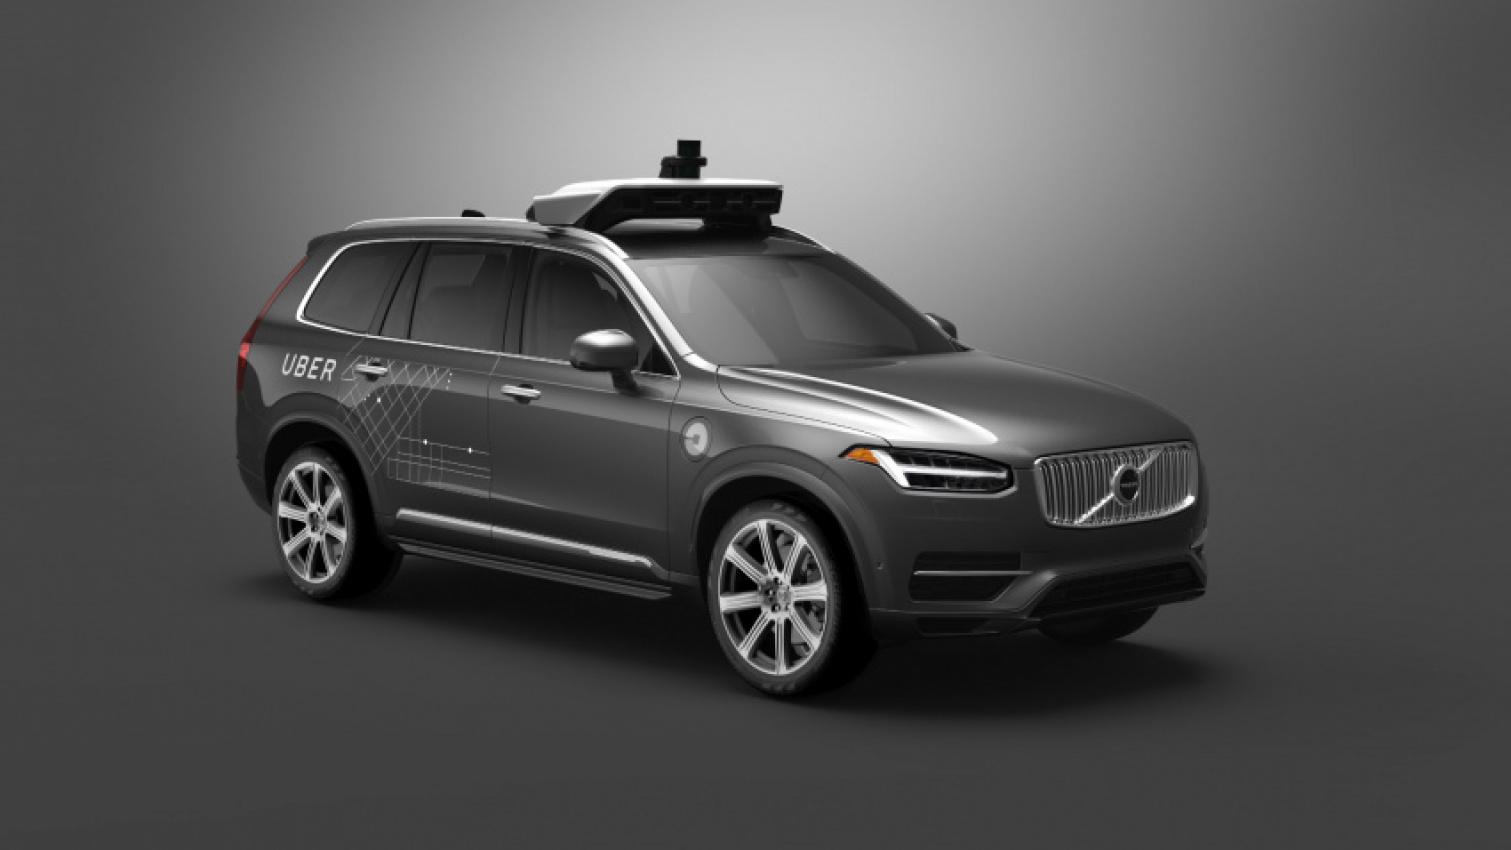 autos, car brands, cars, volvo, autonomous, uber, volvo xc90, uber’s self-driving volvo xc90 troubled by human error